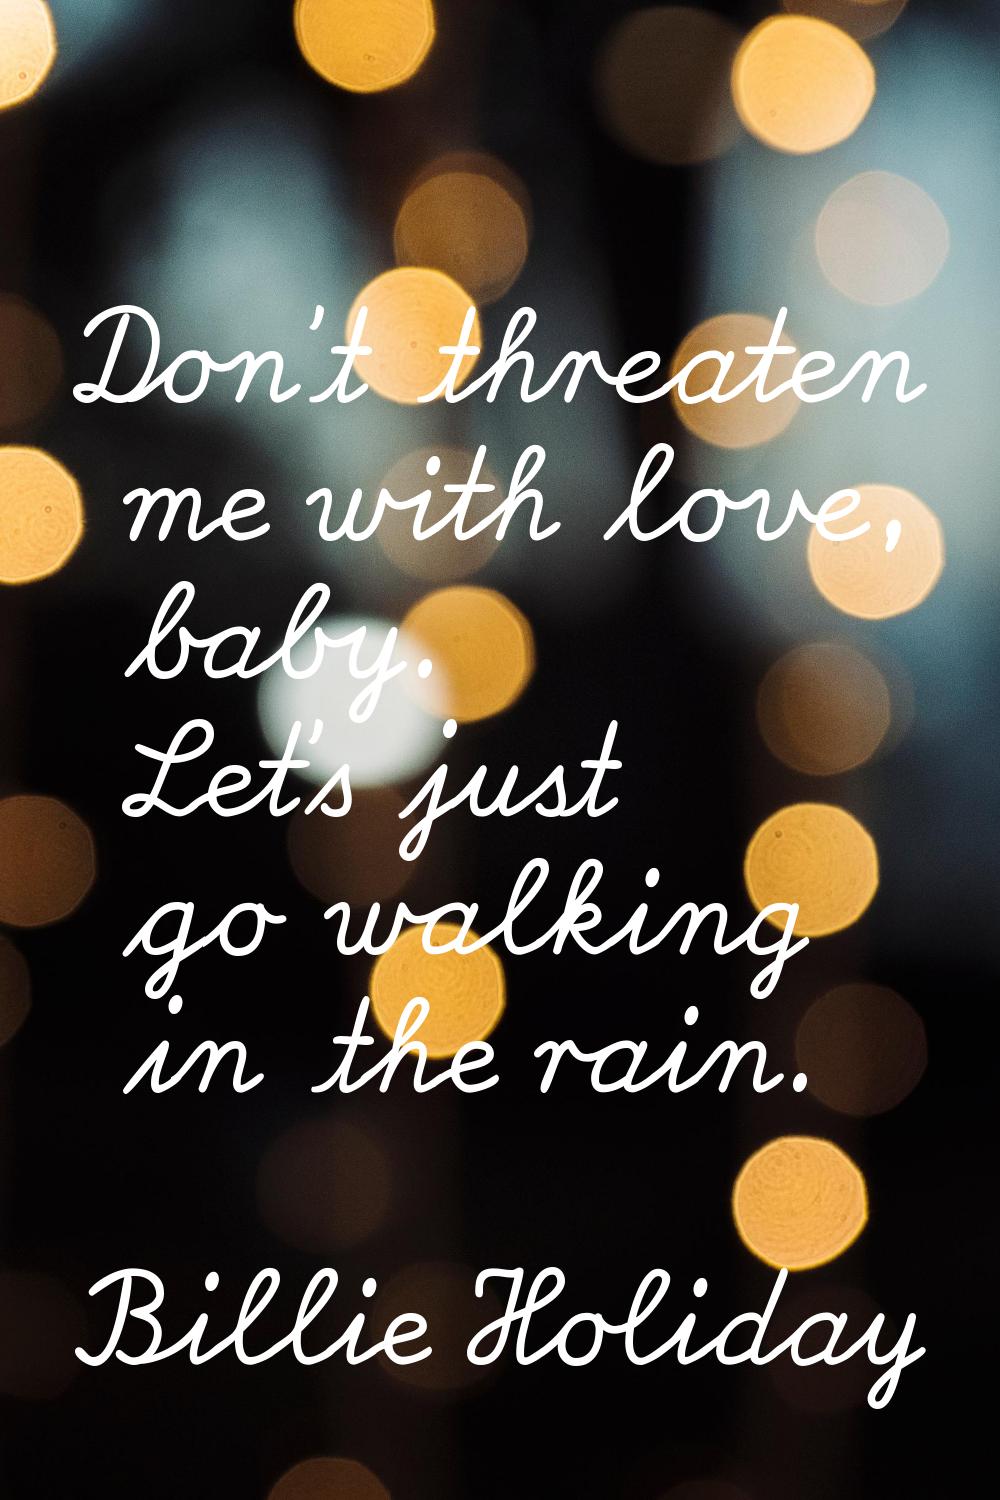 Don't threaten me with love, baby. Let's just go walking in the rain.